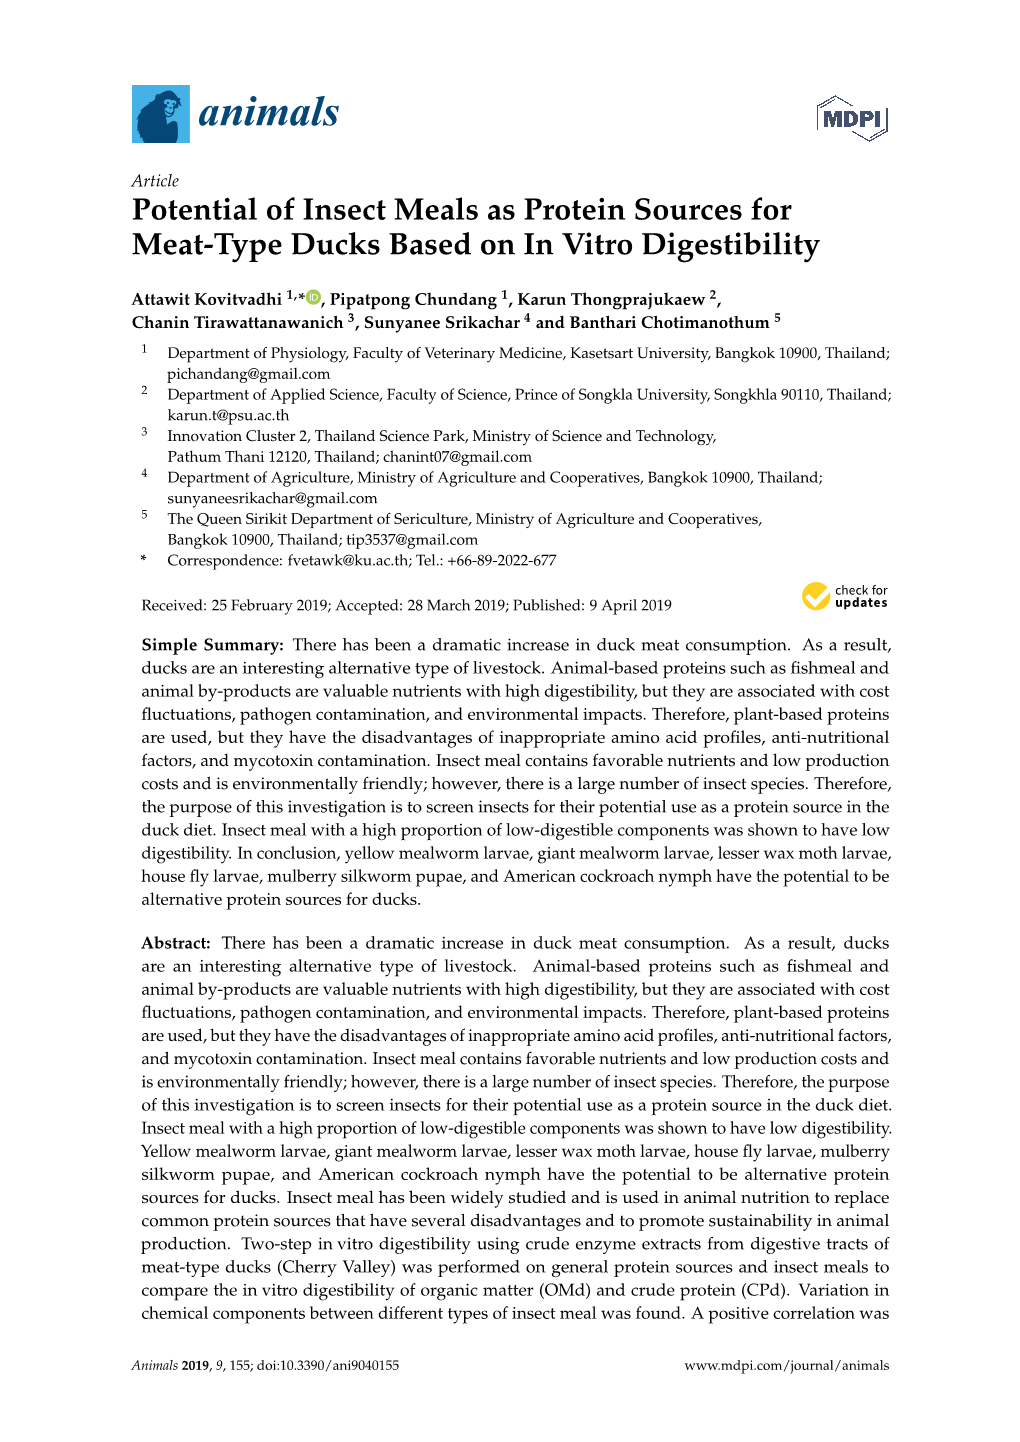 Potential of Insect Meals As Protein Sources for Meat-Type Ducks Based on in Vitro Digestibility